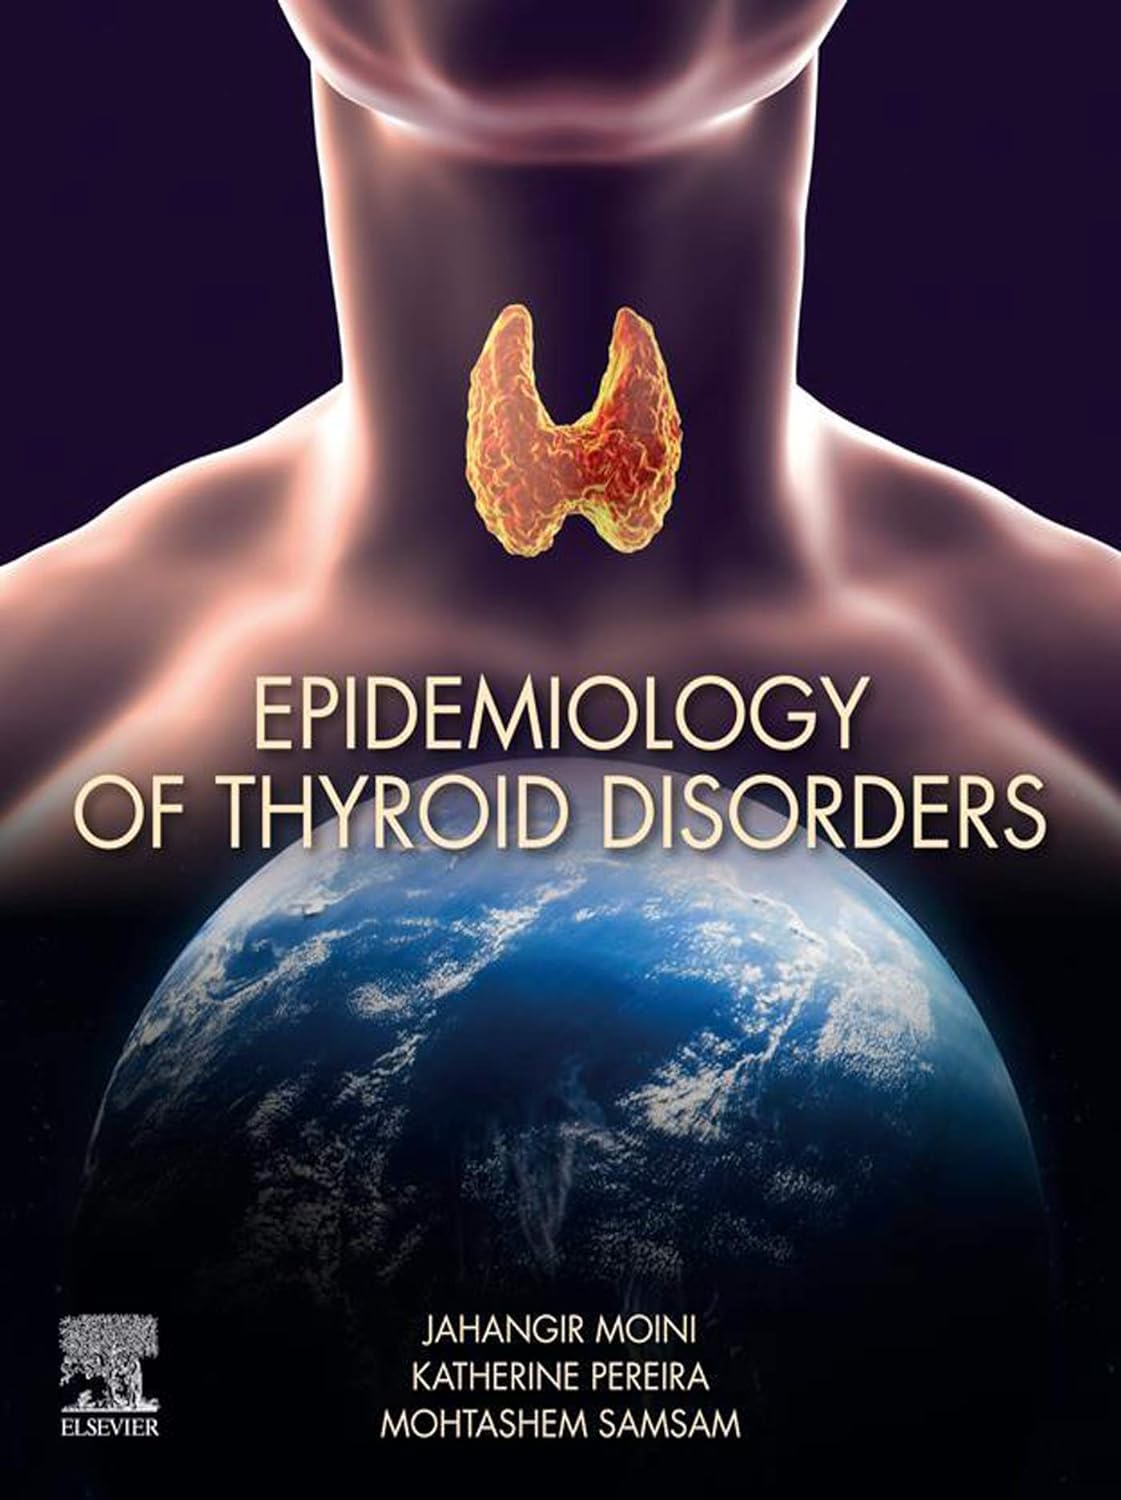 Epidemiology of Thyroid Disorders  by  Jahangir Moini